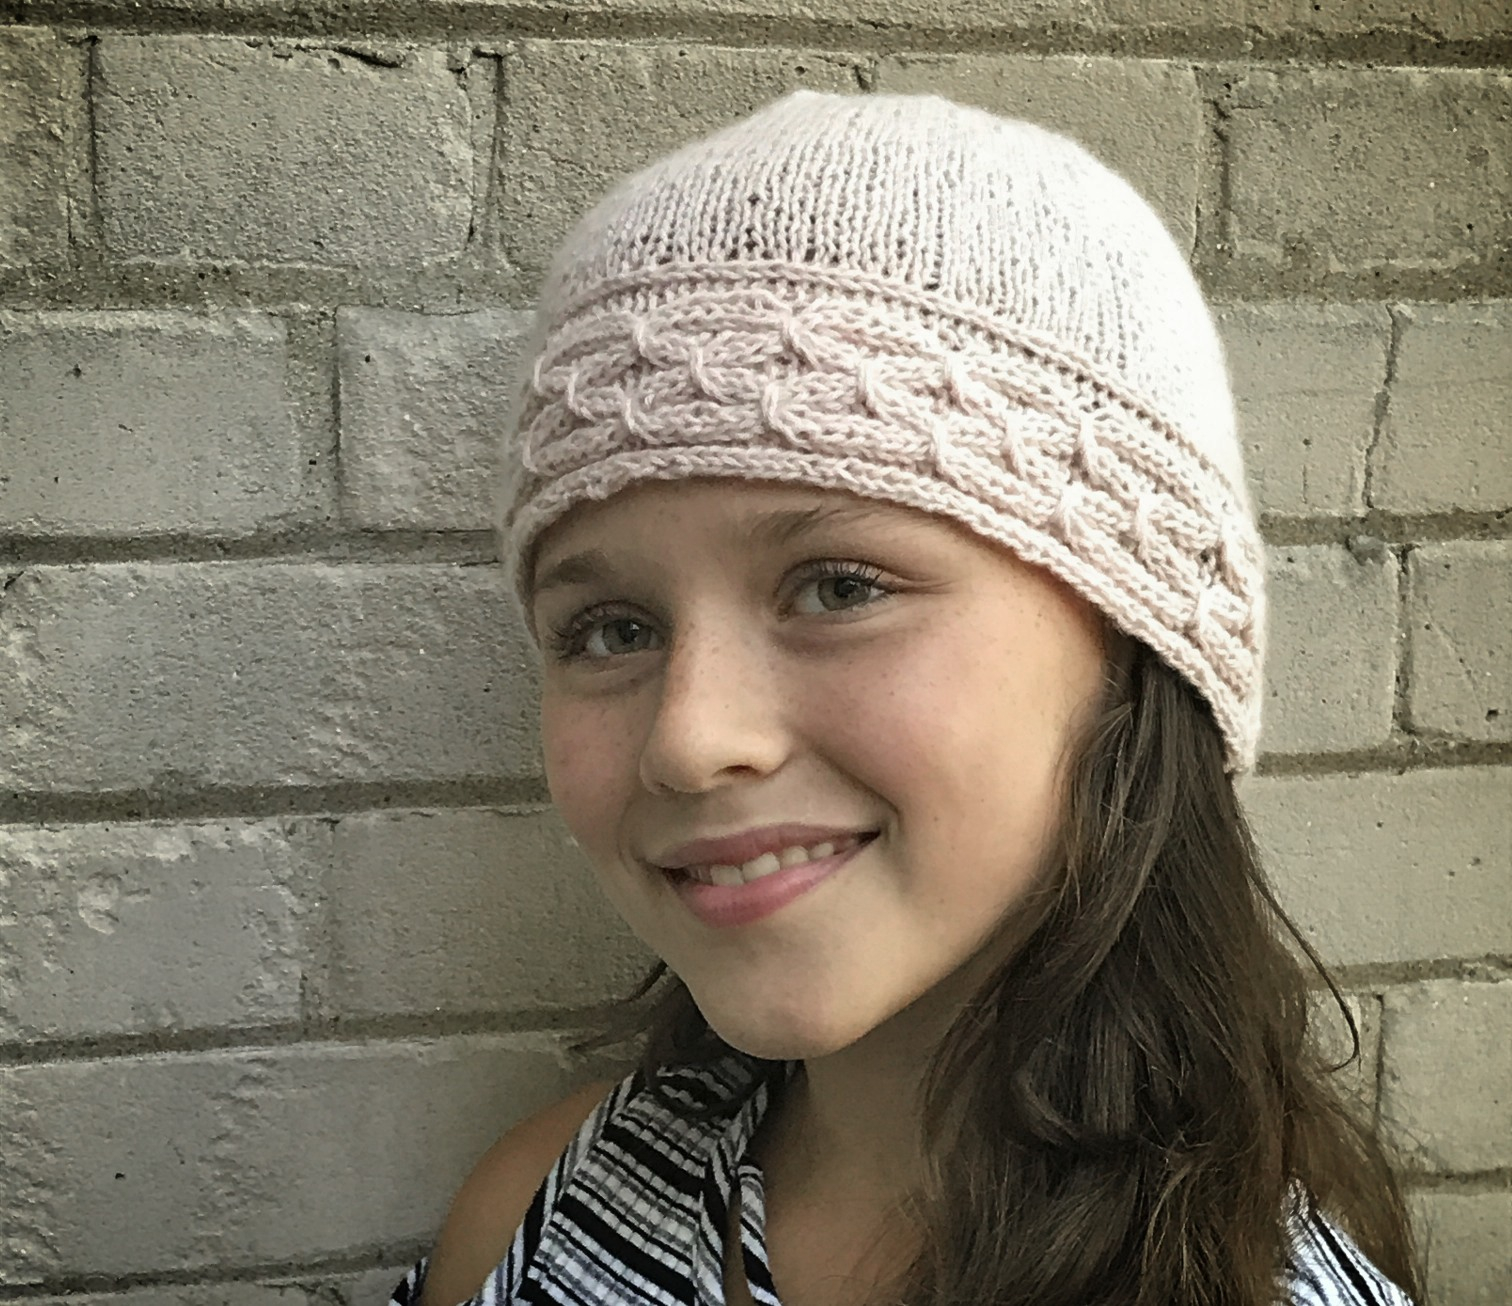 Knit Cap Patterns Knit Hat Tutorial Smocked Brim With Easy To Modify Design